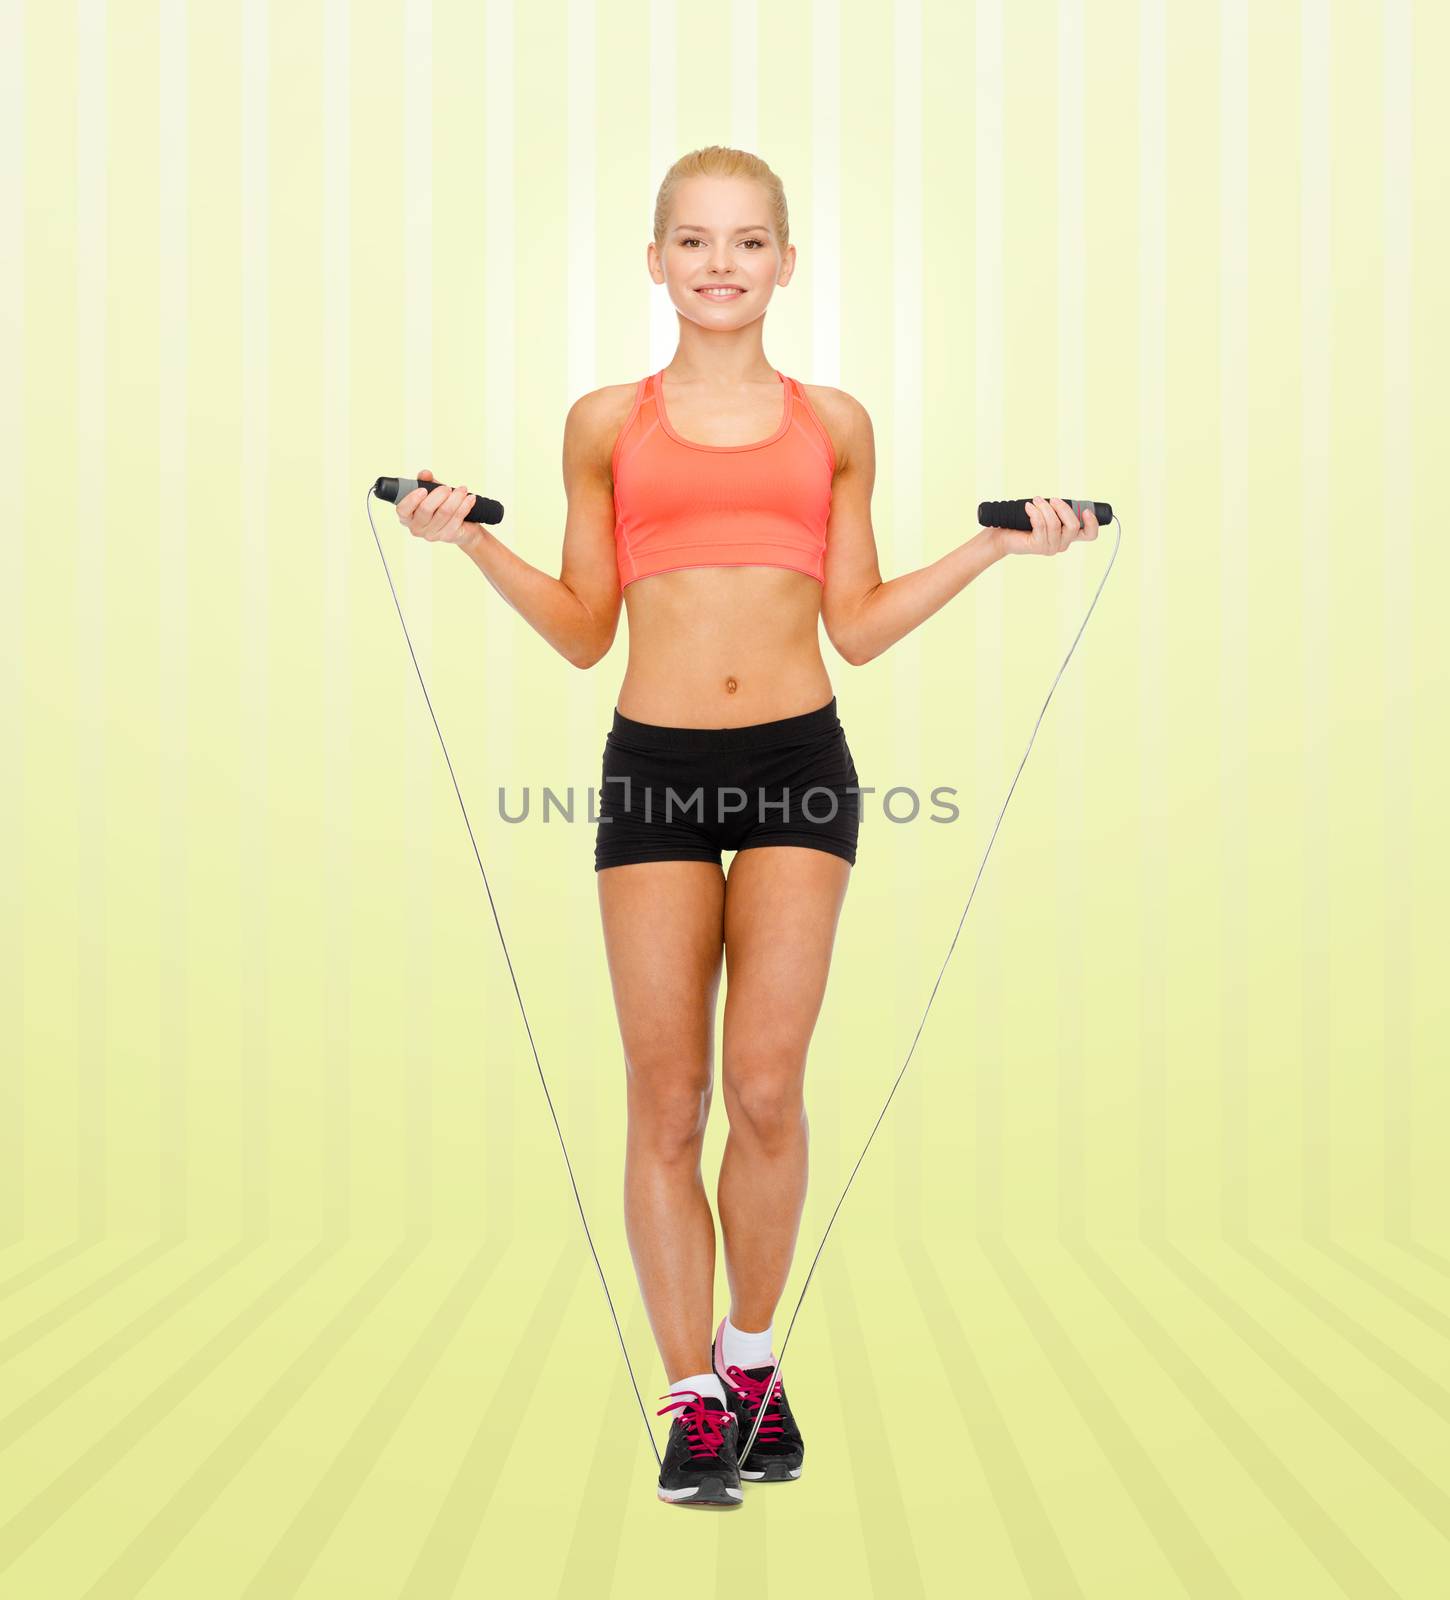 smiling sporty woman jumping with skipping rope by dolgachov